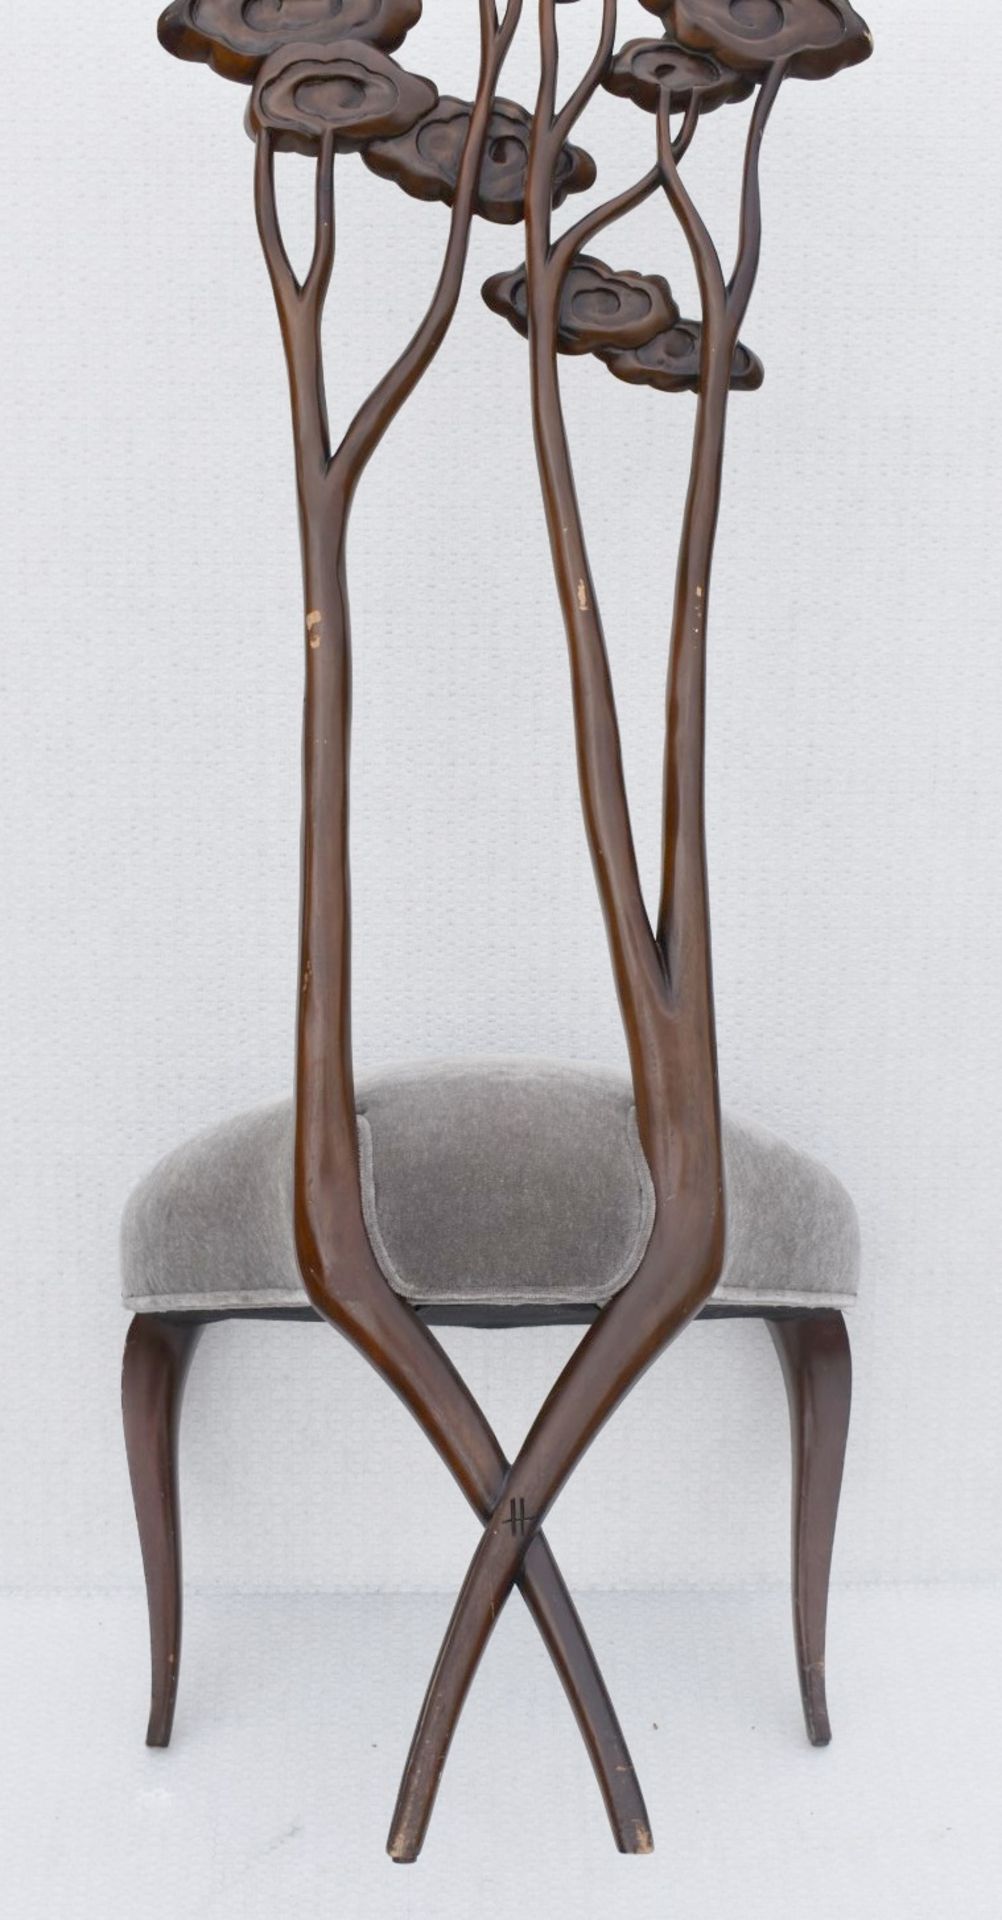 1 x CHRISTOPHER GUY 'Le Jardin' Luxury Hand-carved Solid Mahogany Designer Dining Chair - Recently - Image 10 of 14